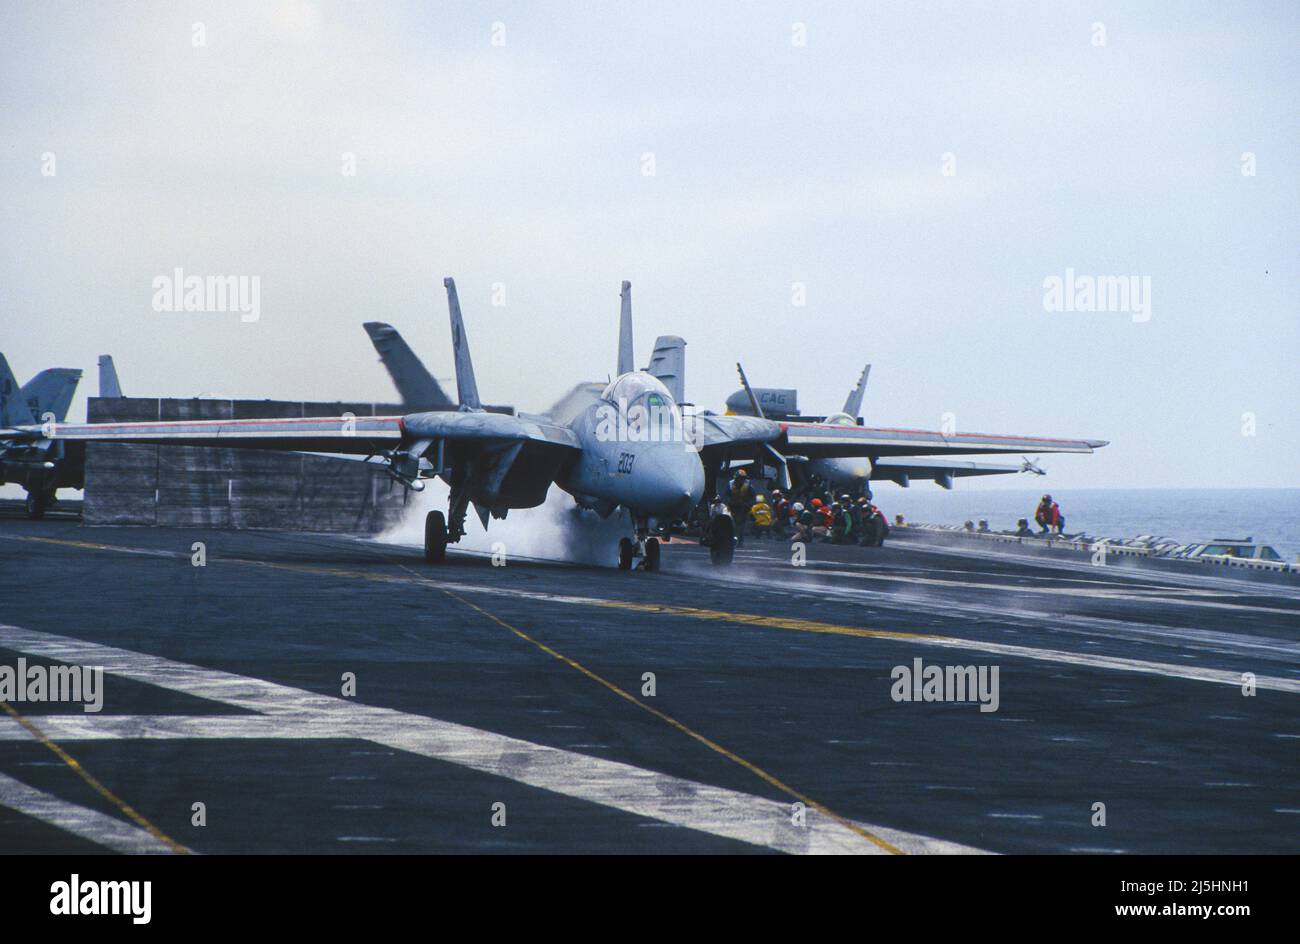 F-14 Tomcat takes off from aircraft carrier Stock Photo